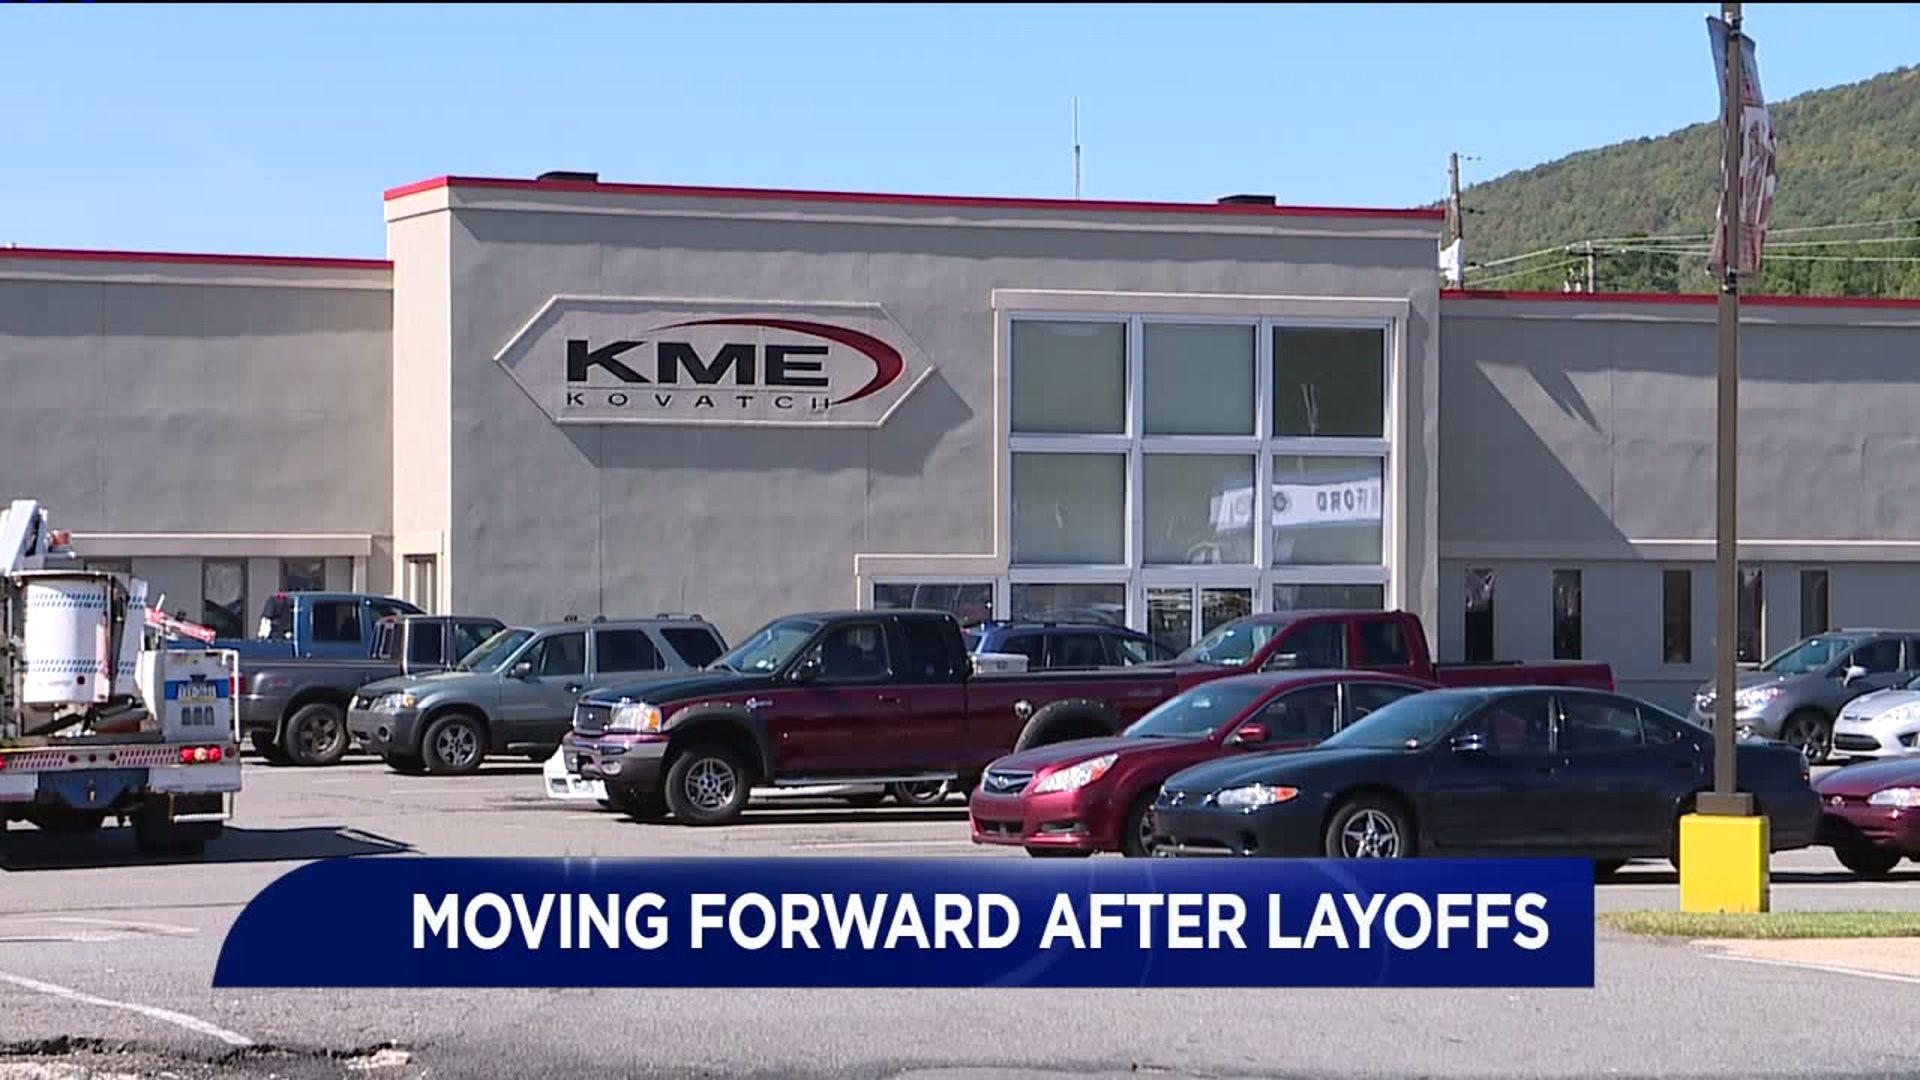 KME Workers Moving Forward After Layoffs